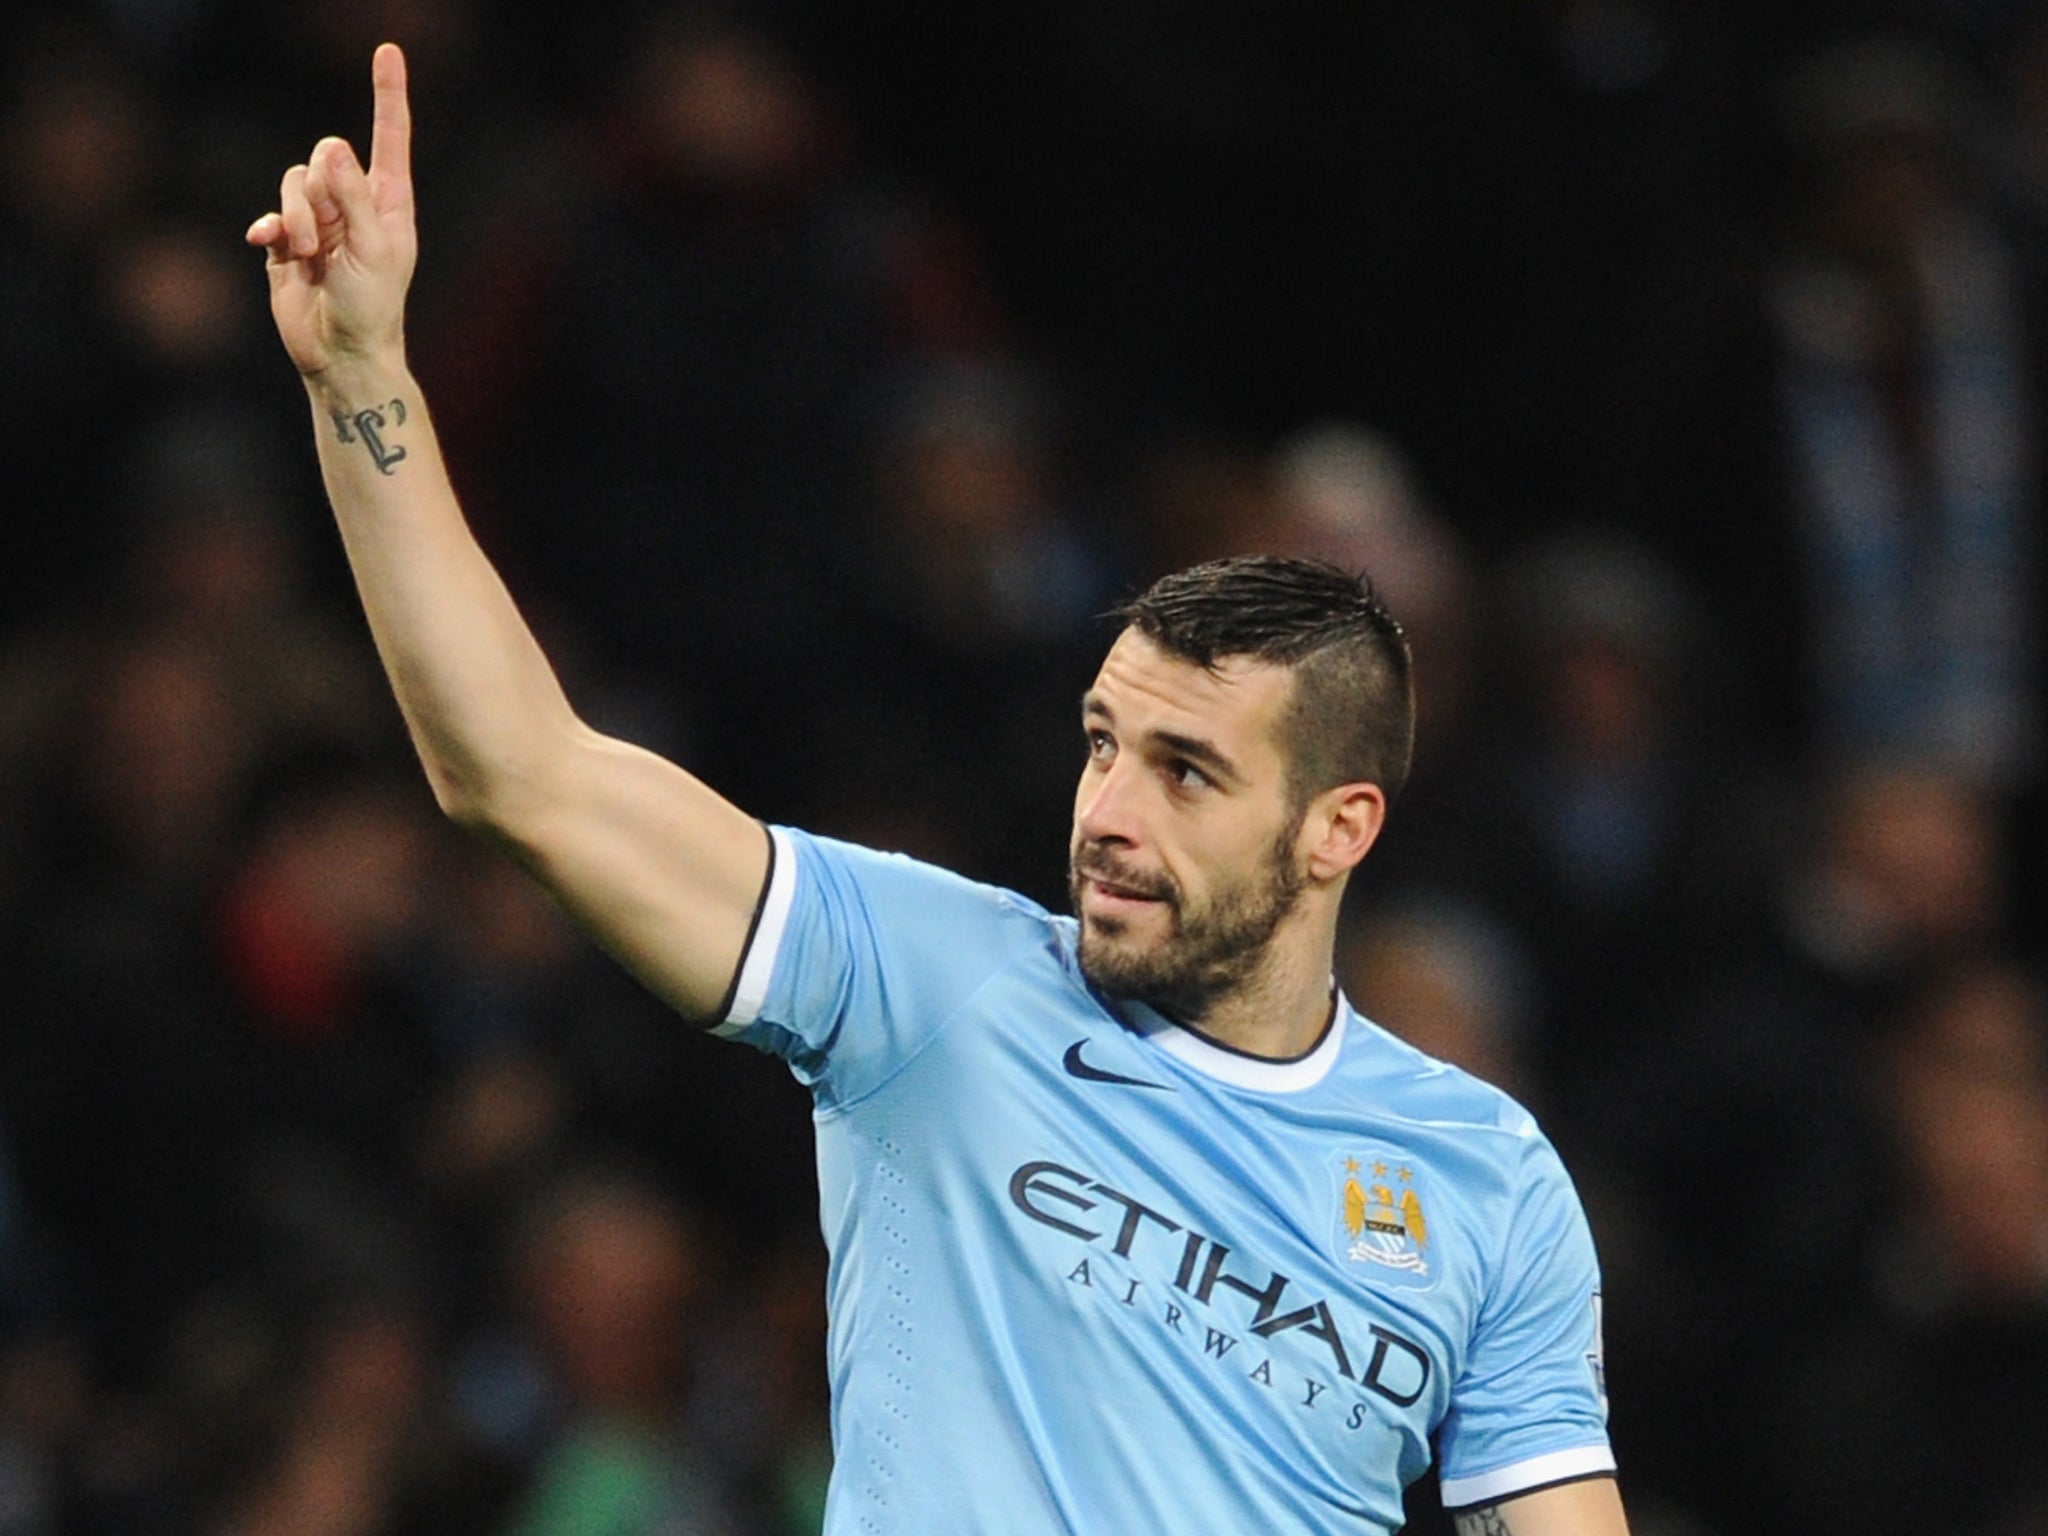 Alvaro Negredo believes Manchester City will pose Barcelona problems of their own when they meet in the Champions League